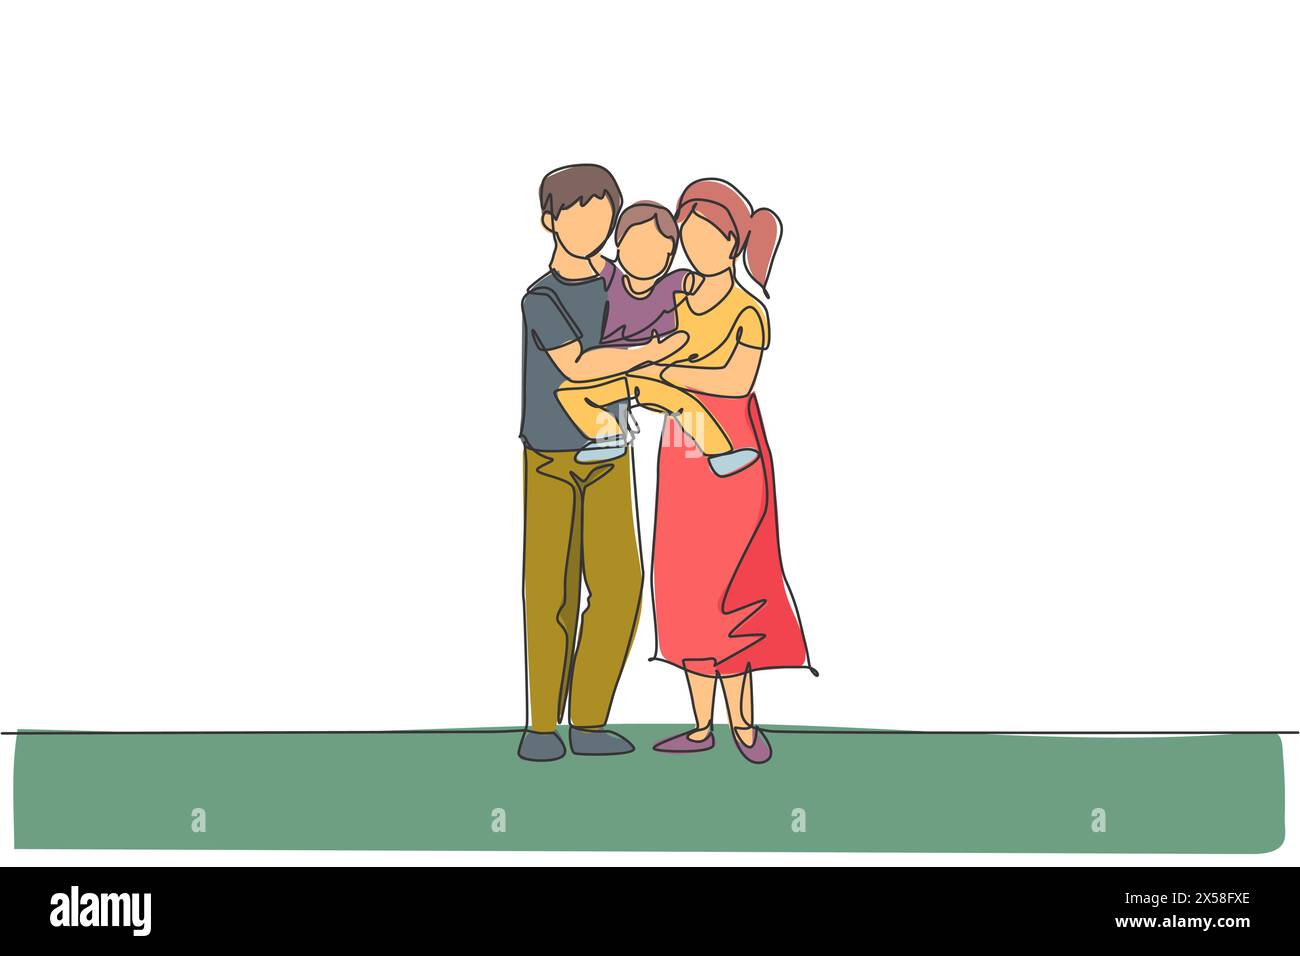 One continuous line drawing young happy mother and father carrying their son together full of warmth. Happy loving parenting family concept. Dynamic s Stock Vector